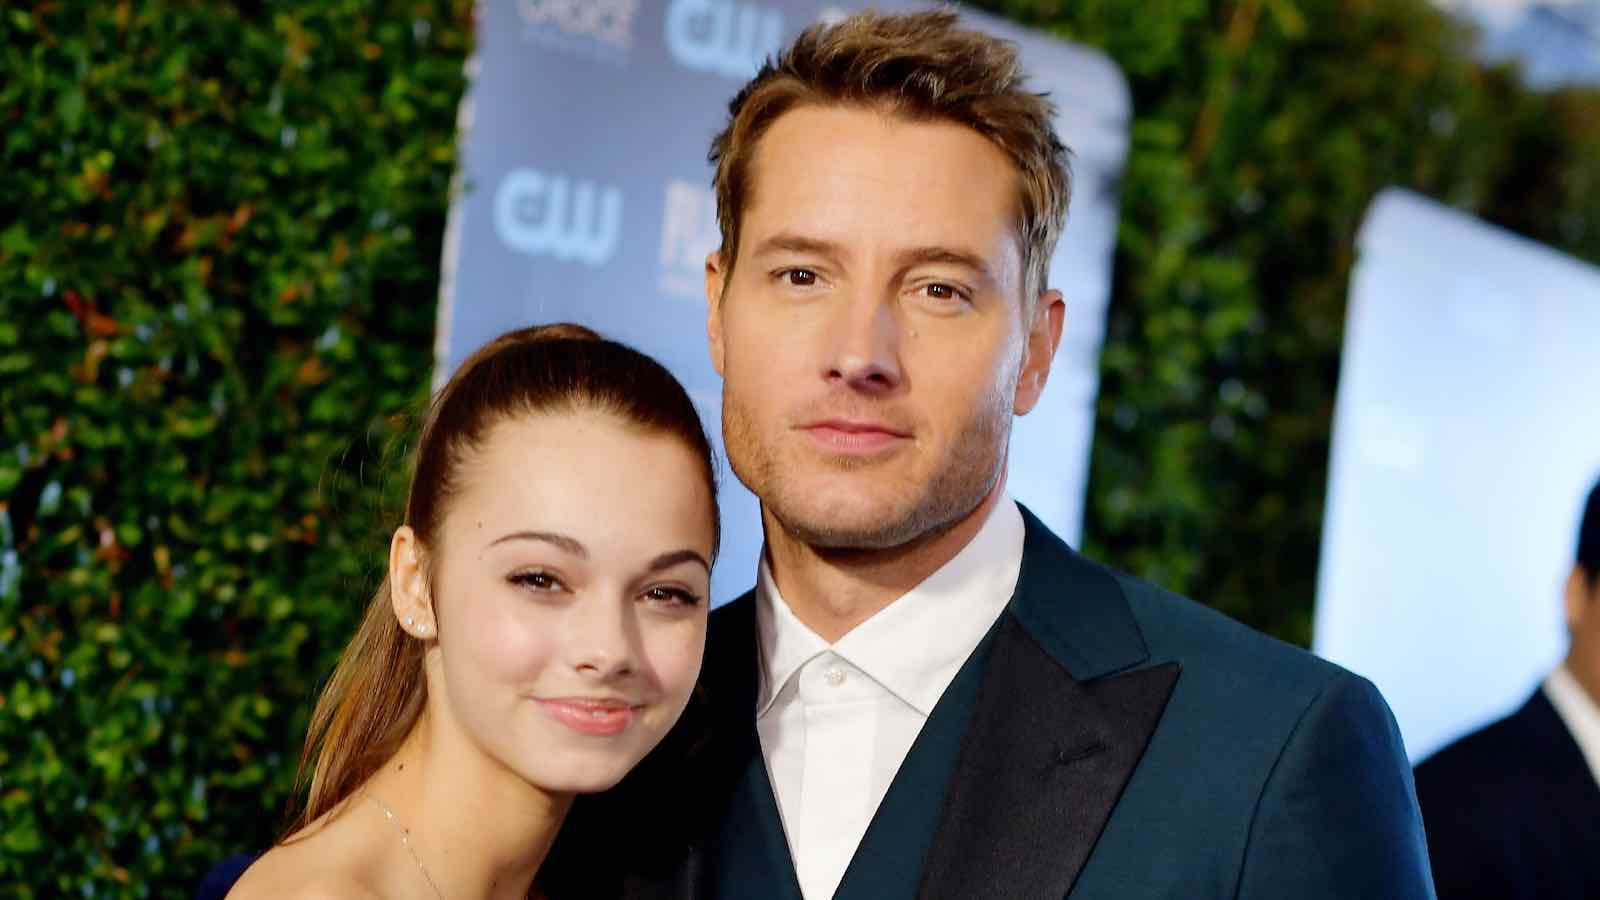 As Justin Hartley deals with the aftermath of his recent divorce, how has this affected his relationship with his first wife and daughter?